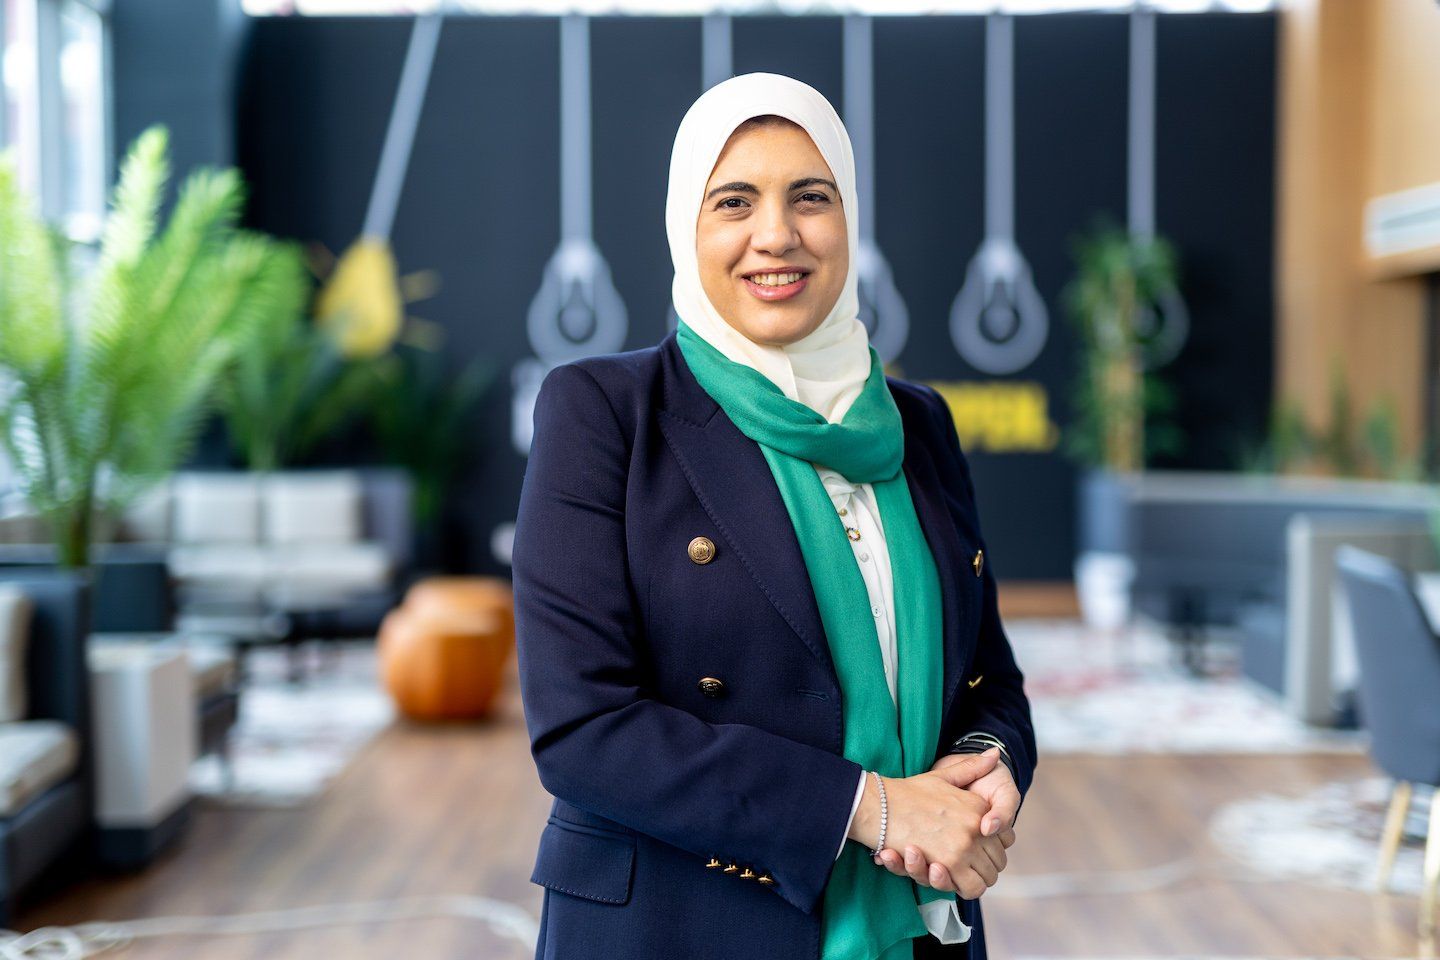 Khadija Elbedweihy from Egypt, founder of PraxiLabs